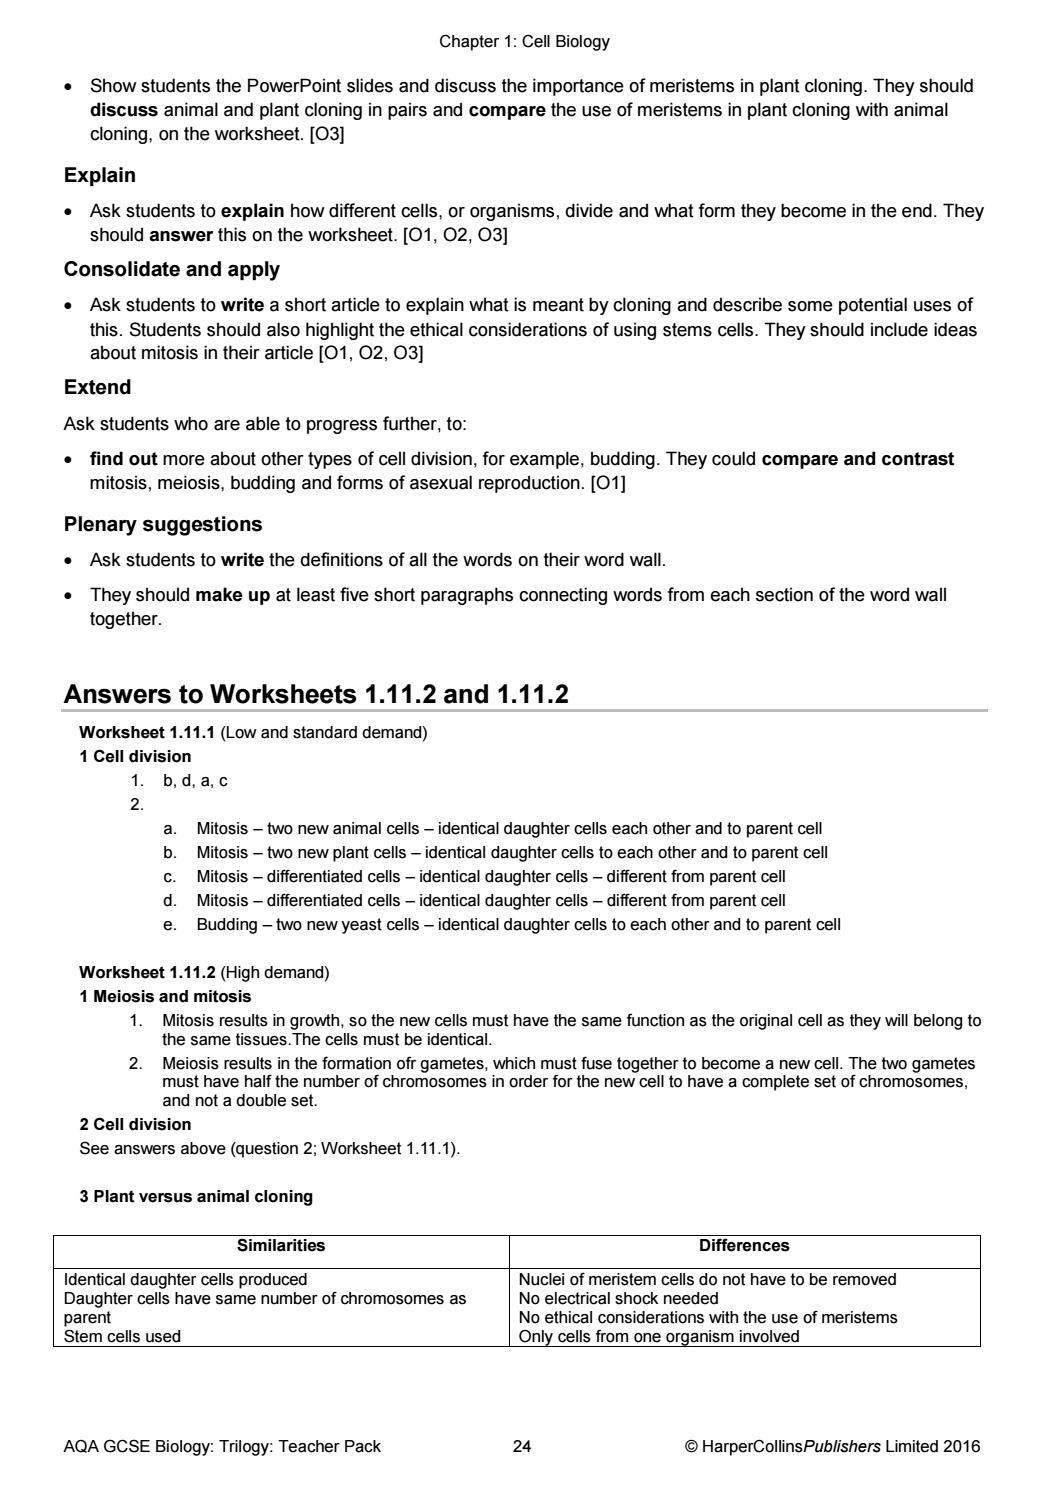 Cell Division Worksheet Answers Aqa Gcse 9 1 Bined Science Trilogy Teacher Pack by